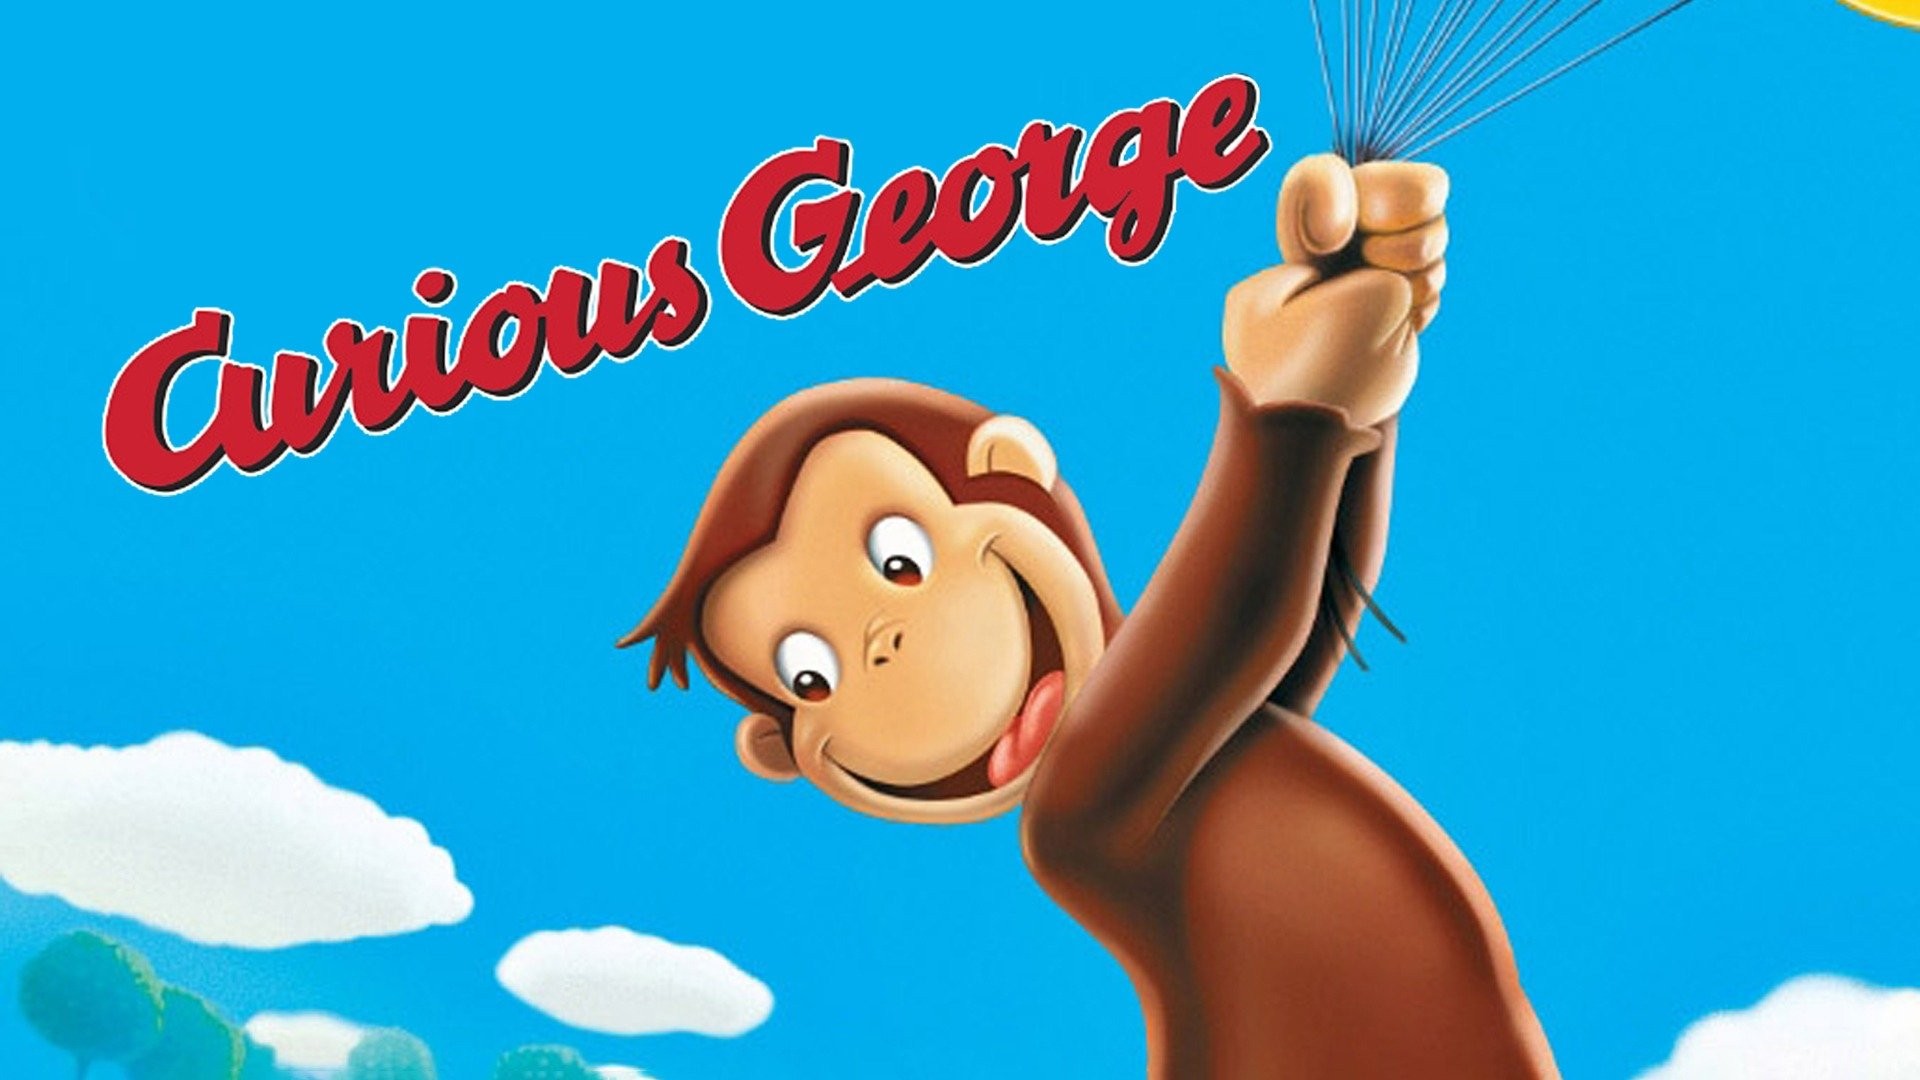 HD wallpaper curious george  Wallpaper Flare